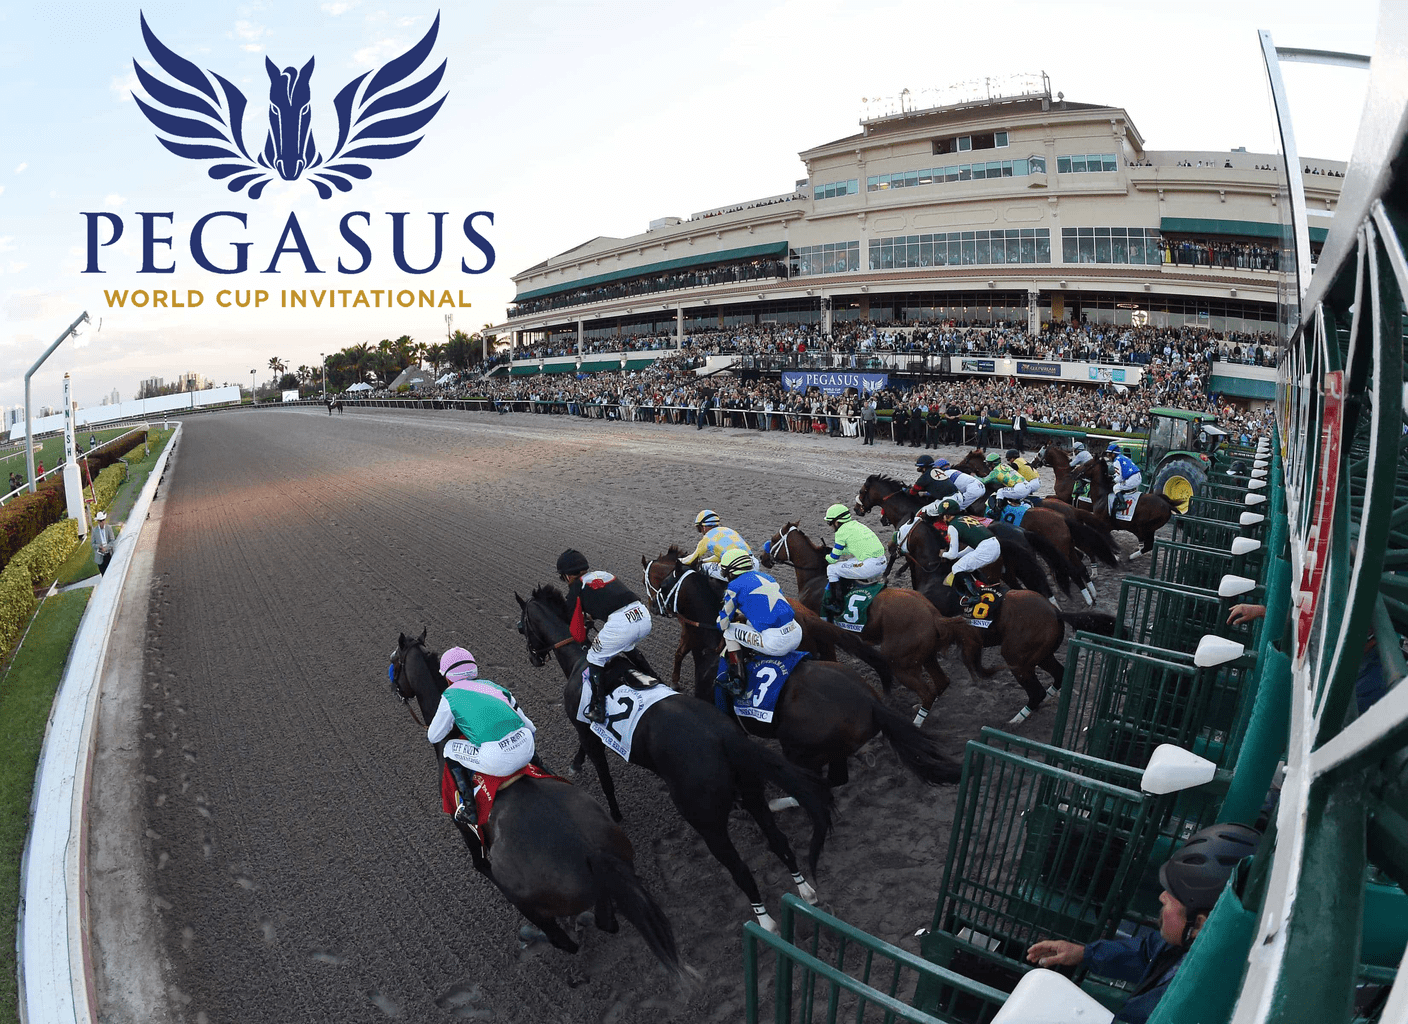 Pegasus World Cup Invitational horse racing event at Gulfstream Park